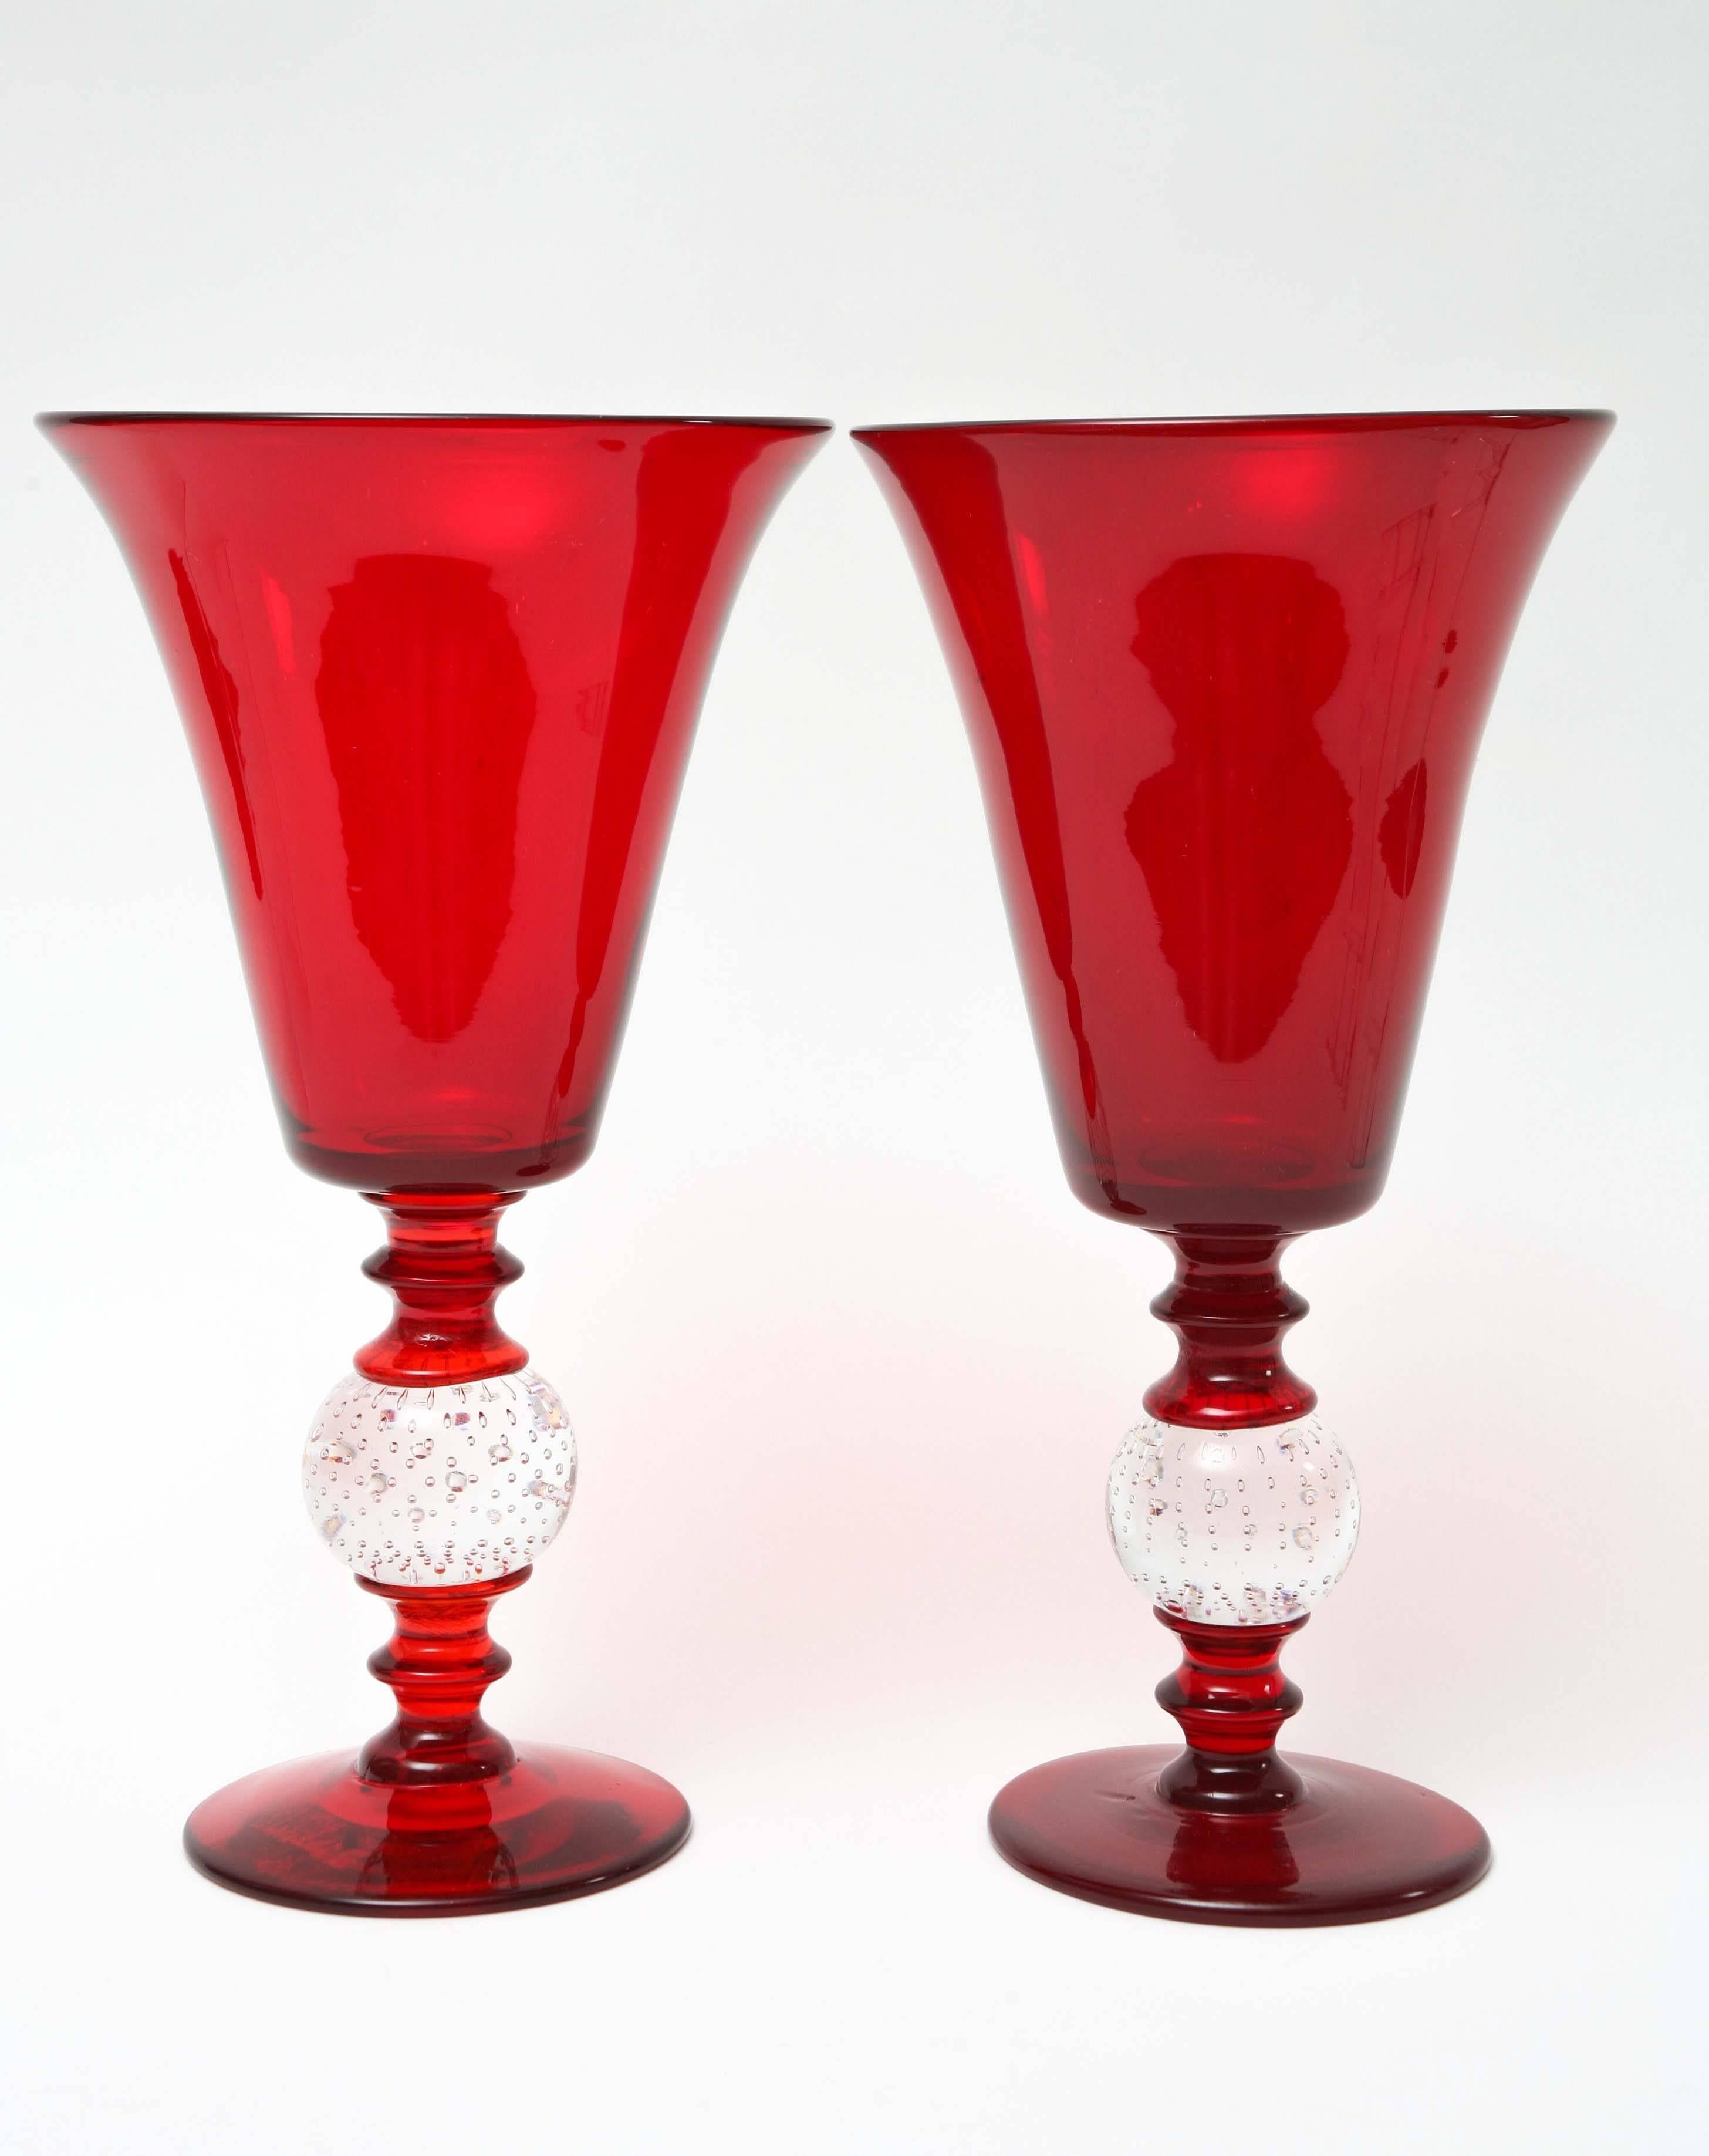 From one of our favorite glass blowers, New Bedford MA is this near matched pair of blown vases in the Classic inverted bell shape. As these pieces are individually blown, you can see the slight differences in the stem size and color. So wonderful